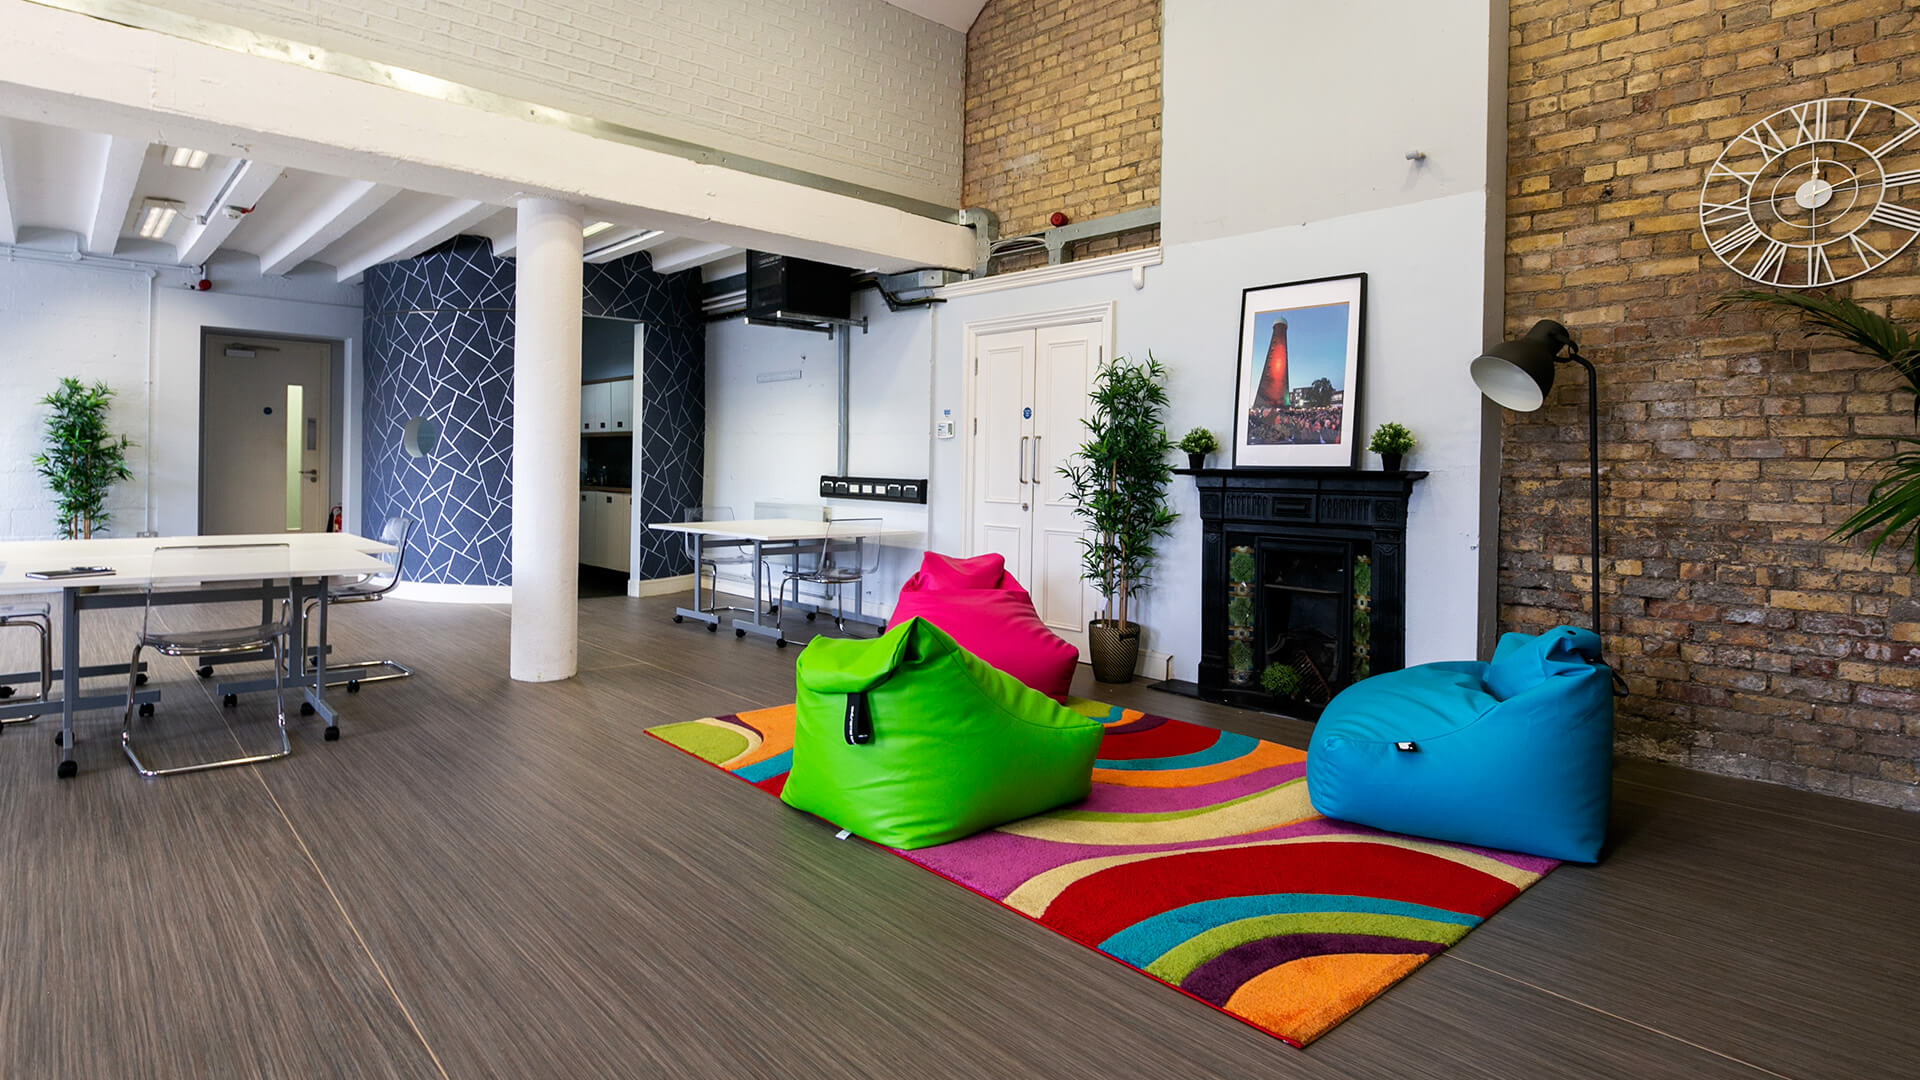 Brightly coloured beanbags sit on a rug in an open-plan office space